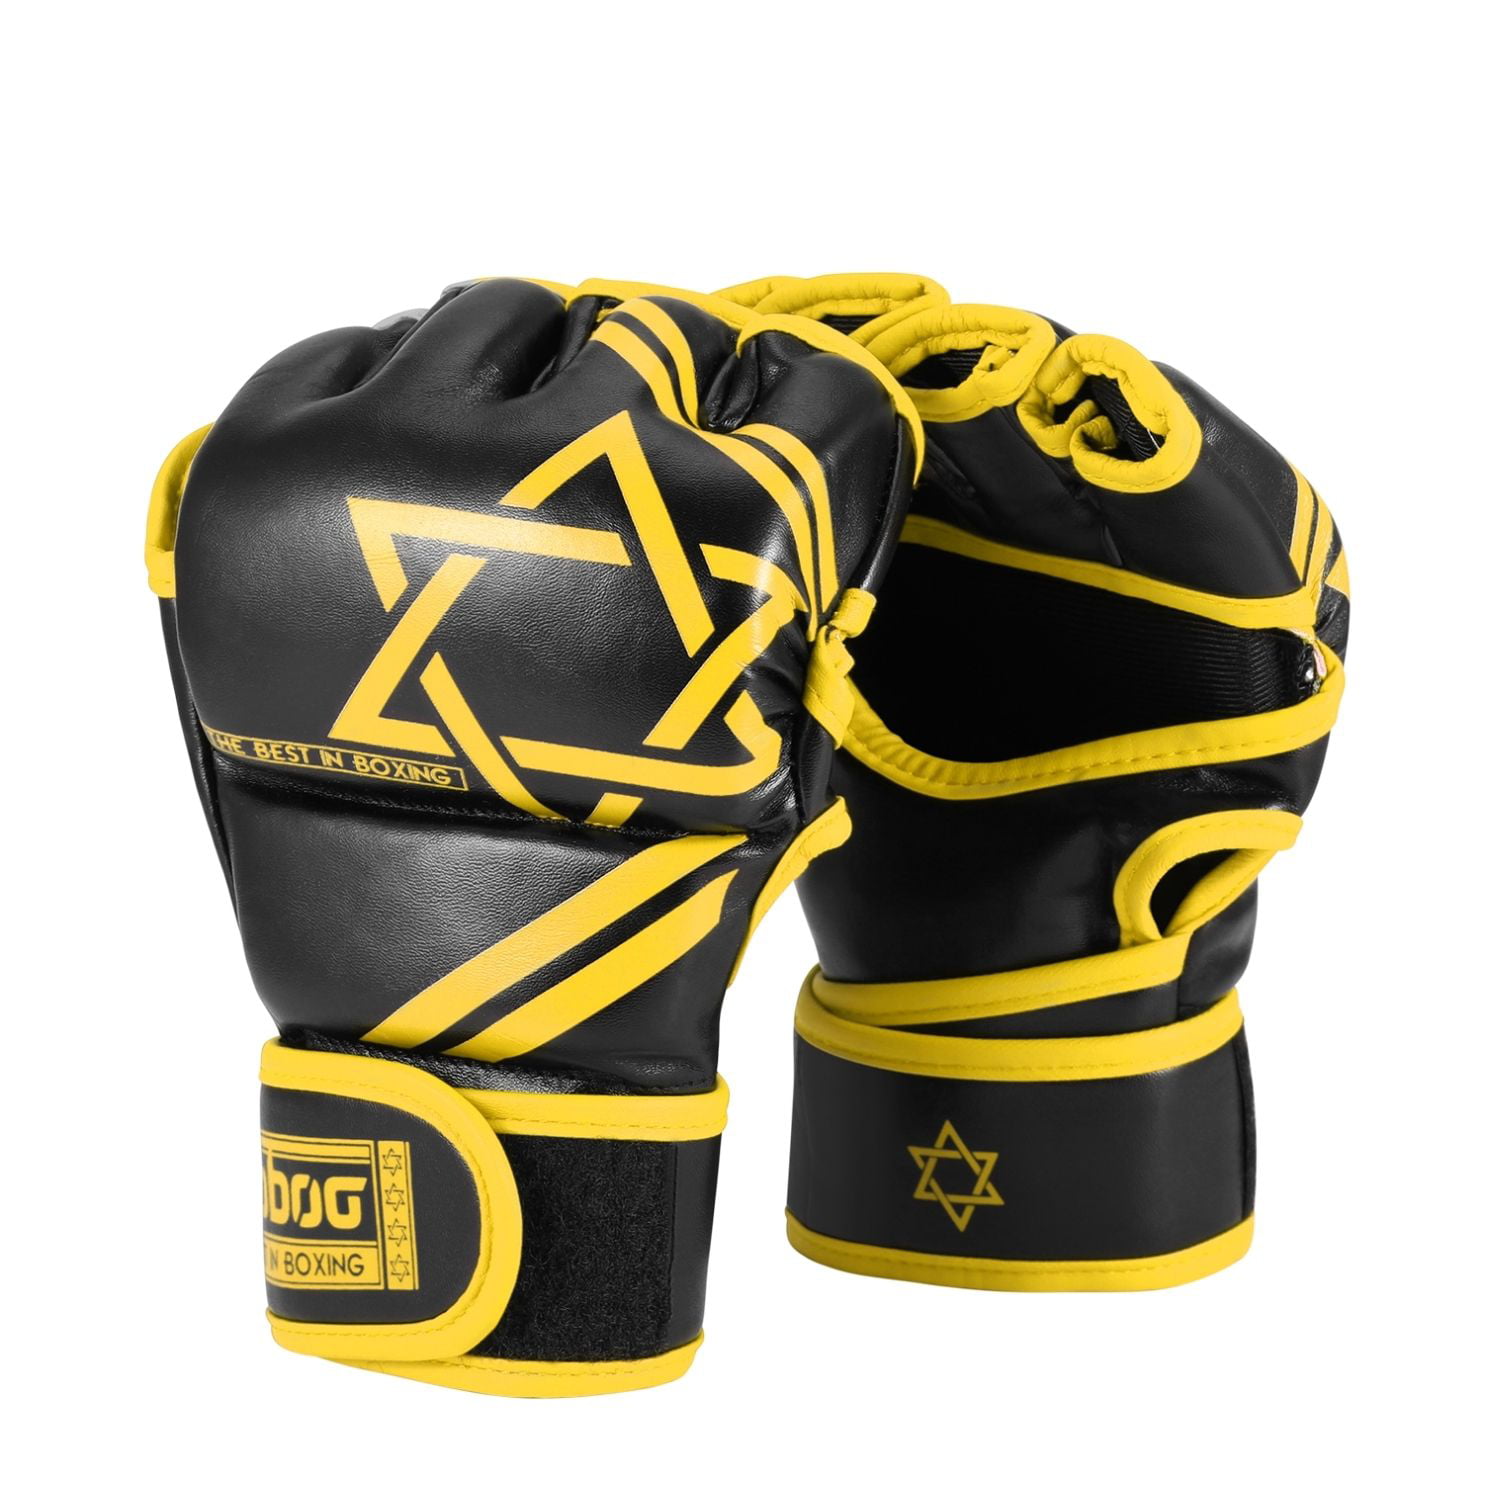 MMA Gloves Boxing Martial Arts Training Punch Bag Sparring Muay Thai Grappling 